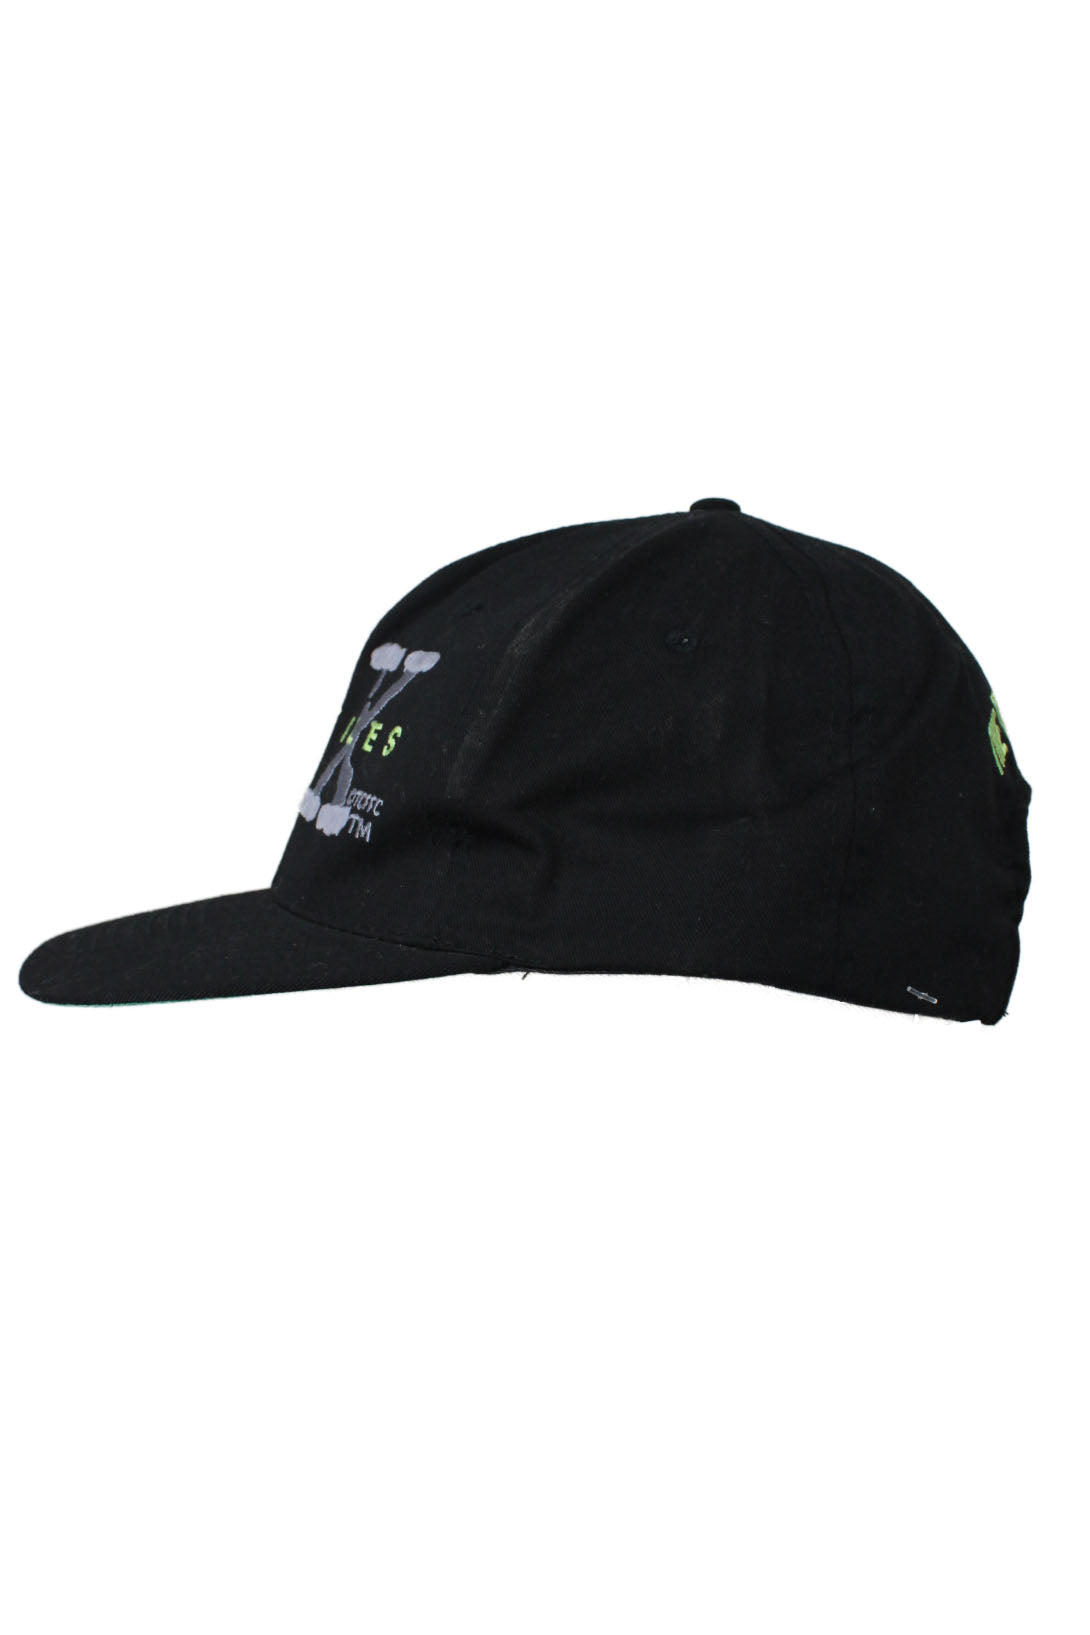 side view of hat.